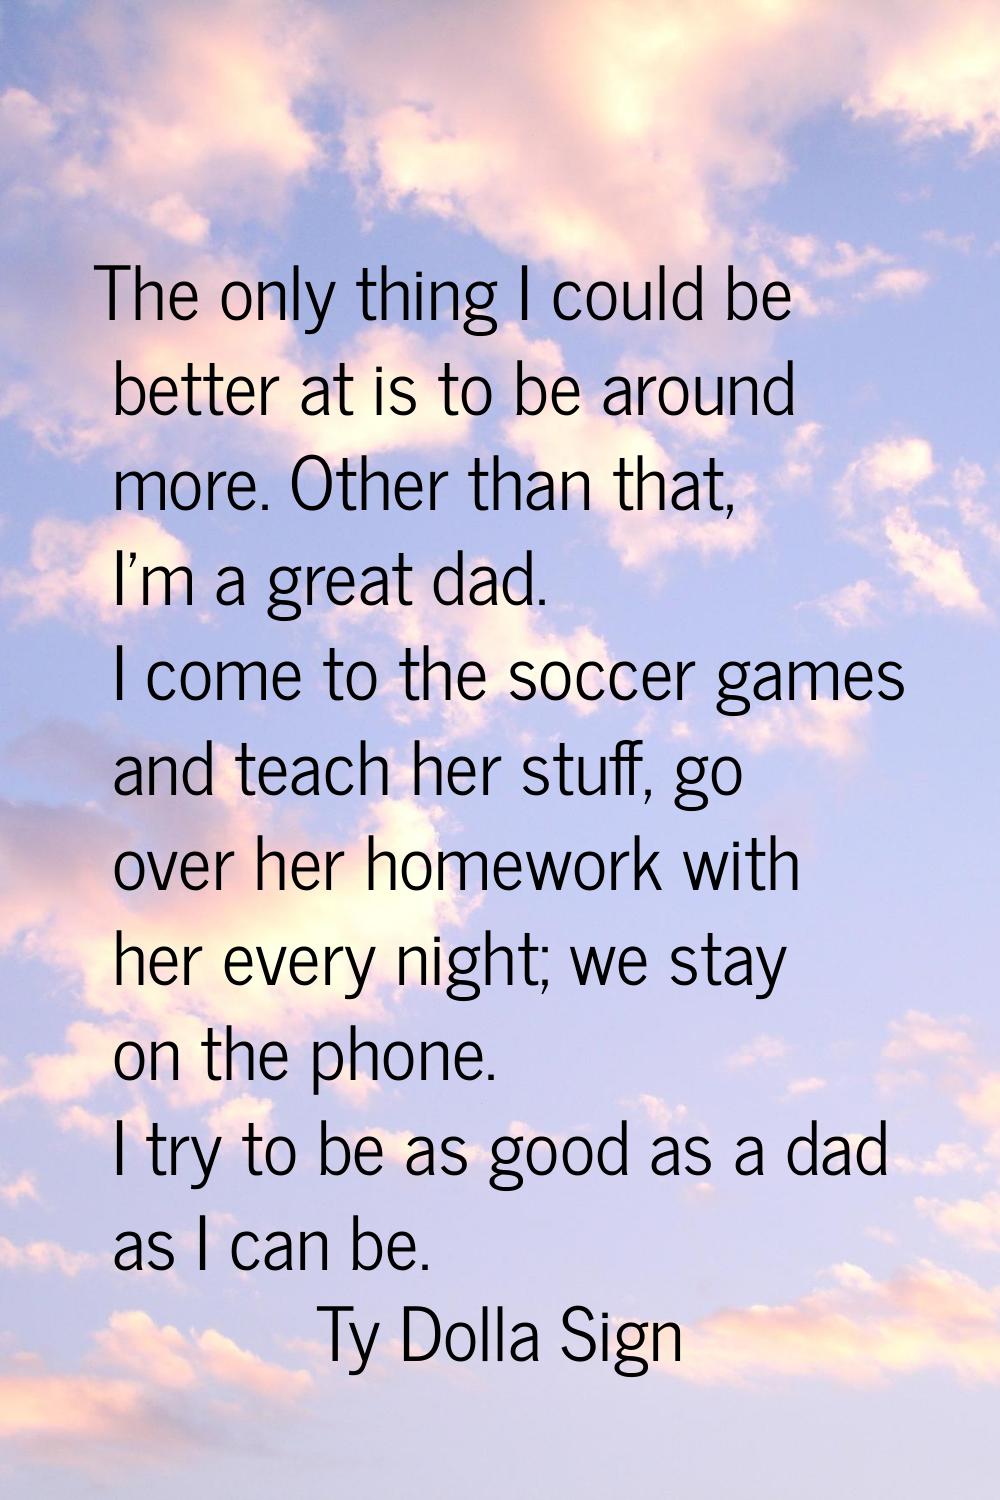 The only thing I could be better at is to be around more. Other than that, I'm a great dad. I come 